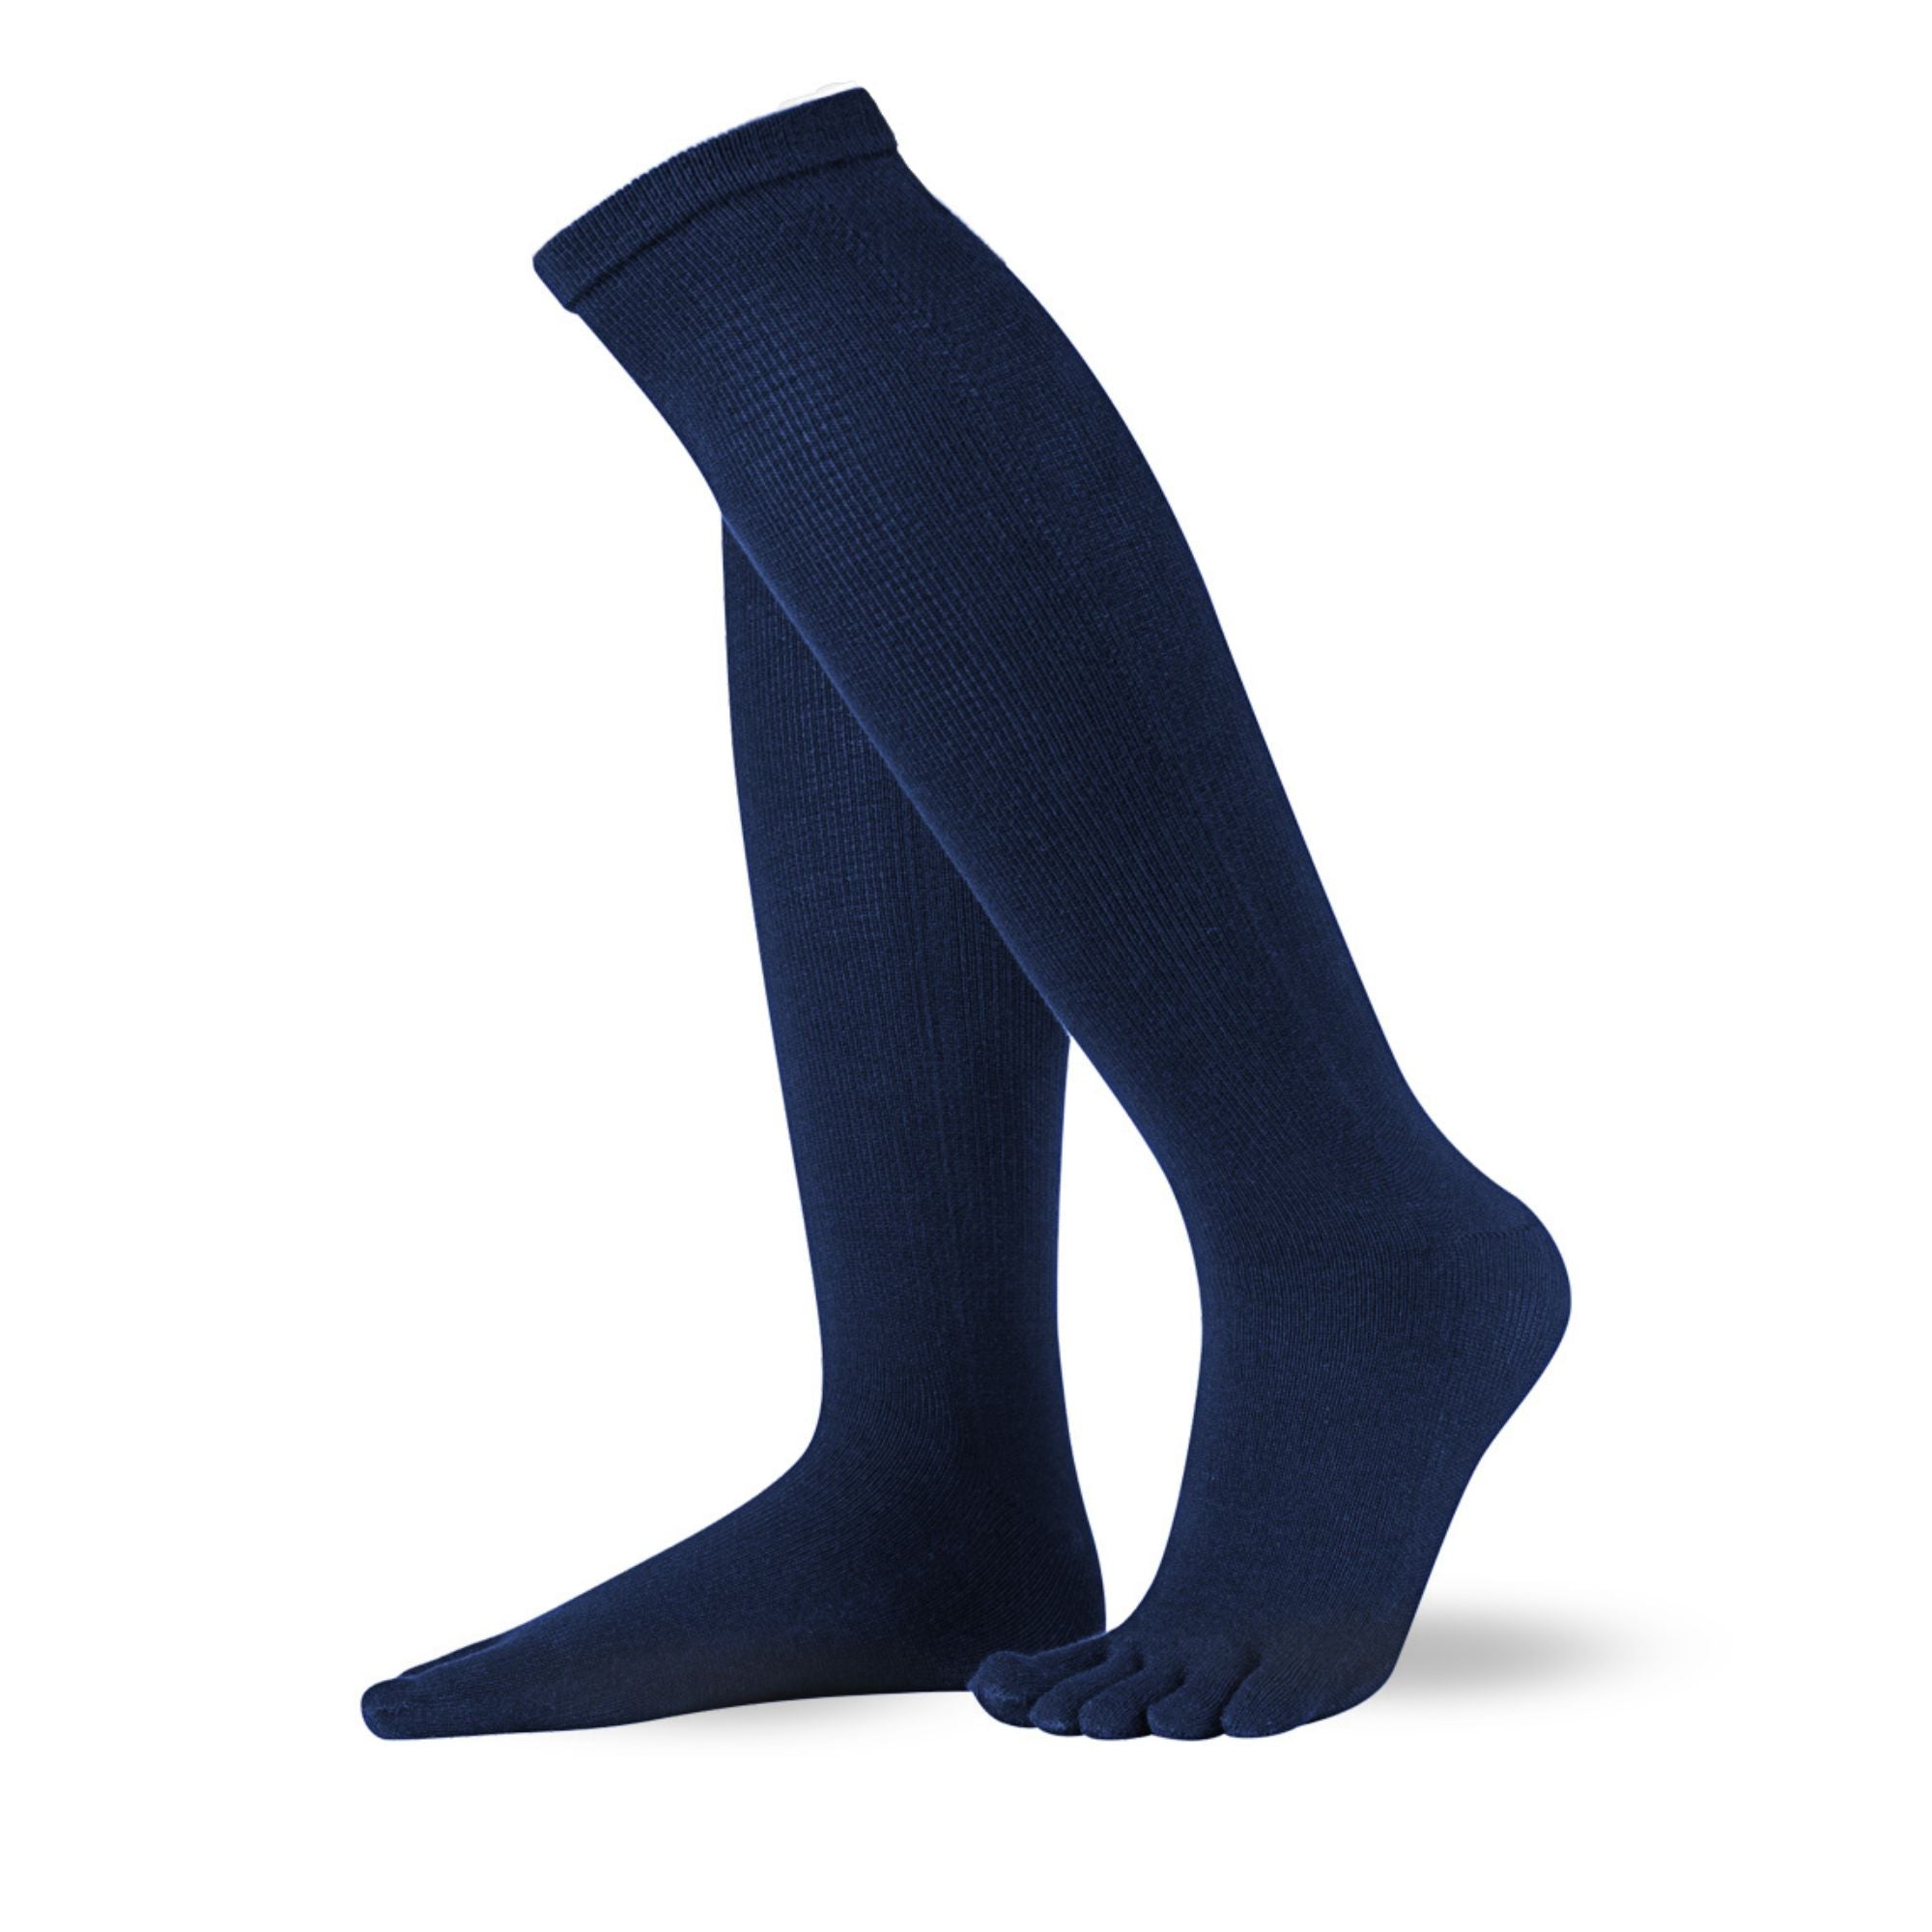 Knitido Essentials toe stockings (cotton) knee-length from the side in Navy